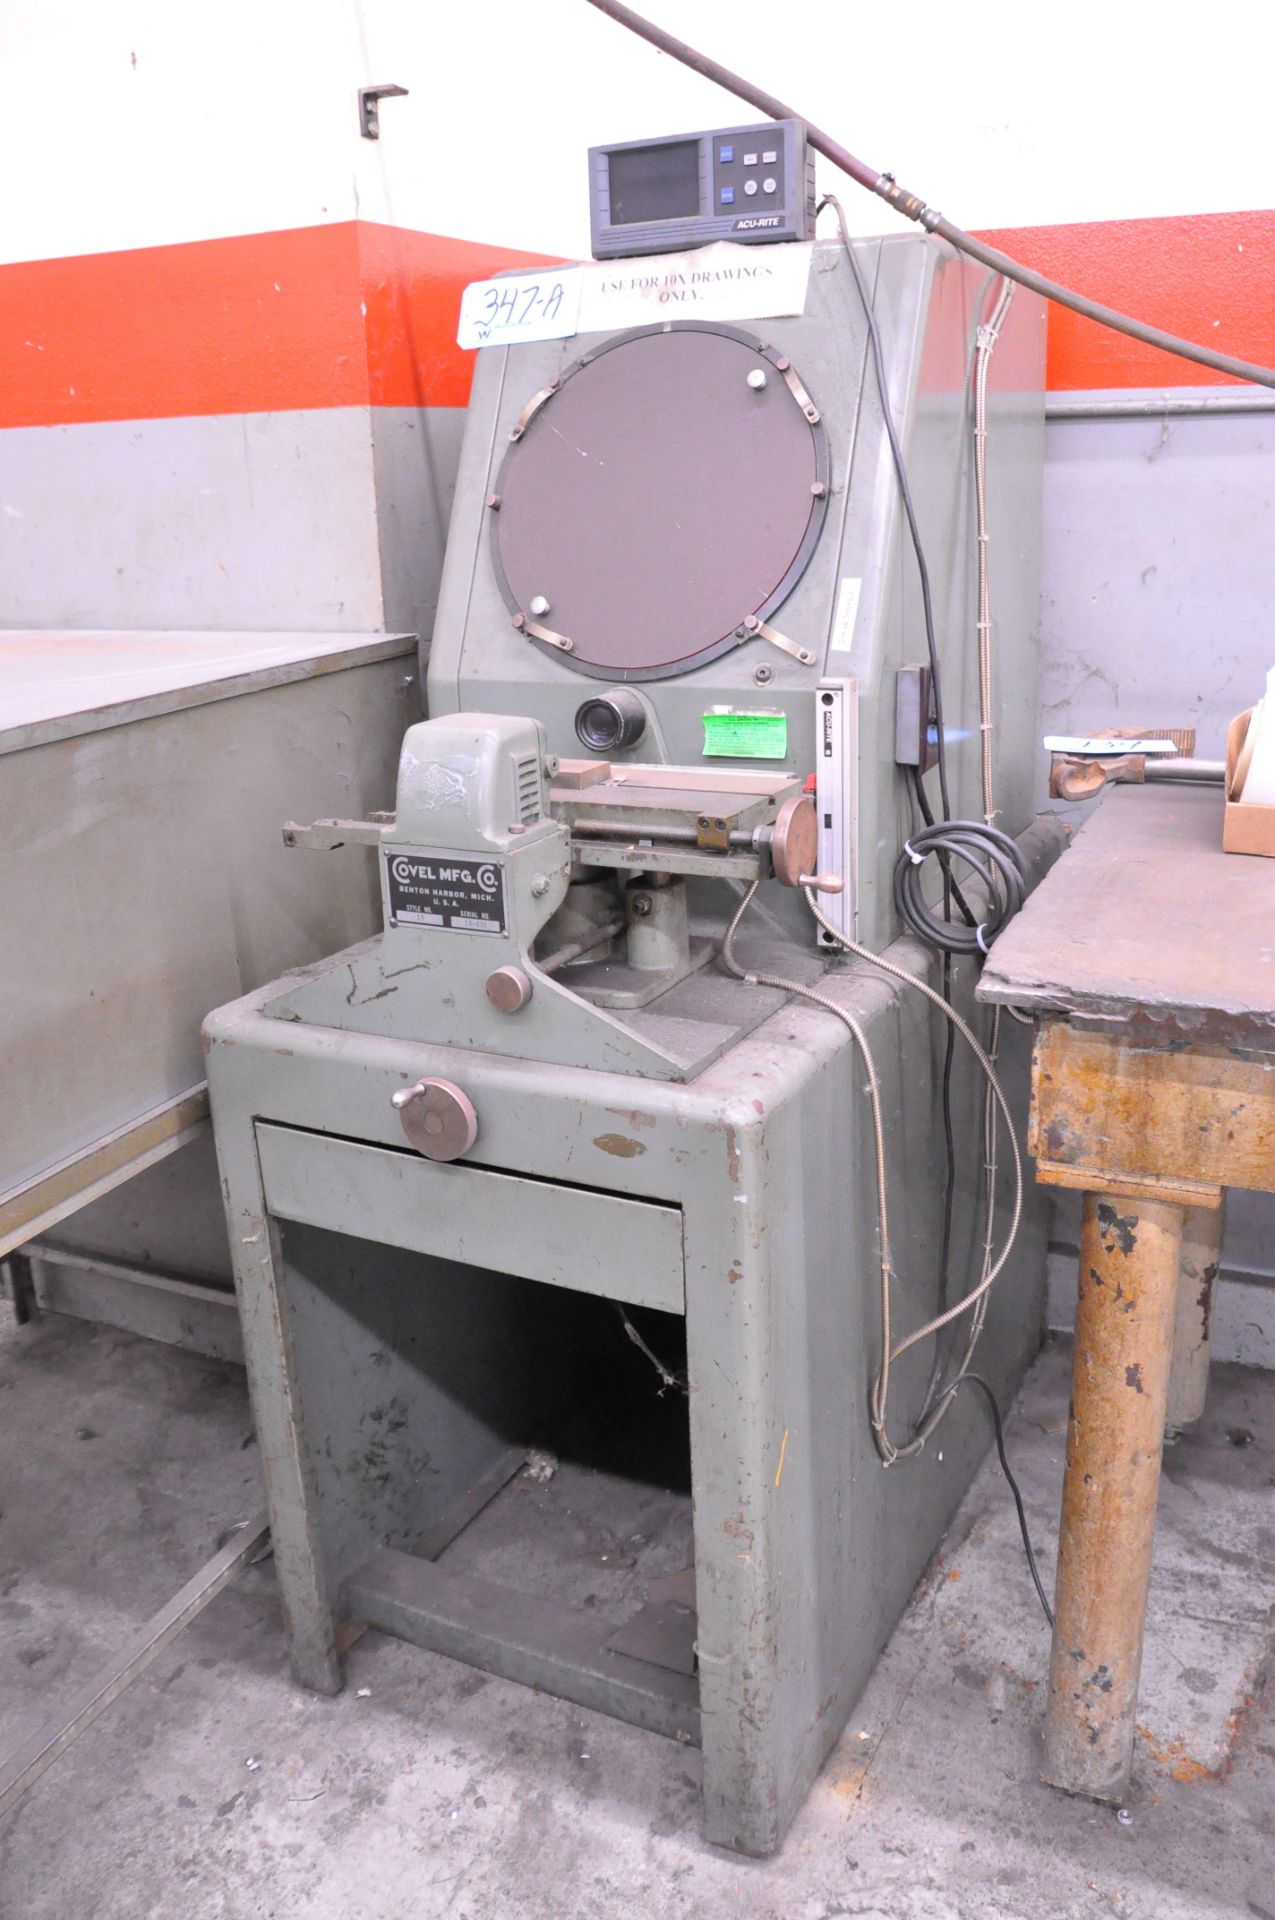 Covel Mfg. Style No. 14, 14" Optical Comparator, Acu-Rite 2-Axis Digital Positioning